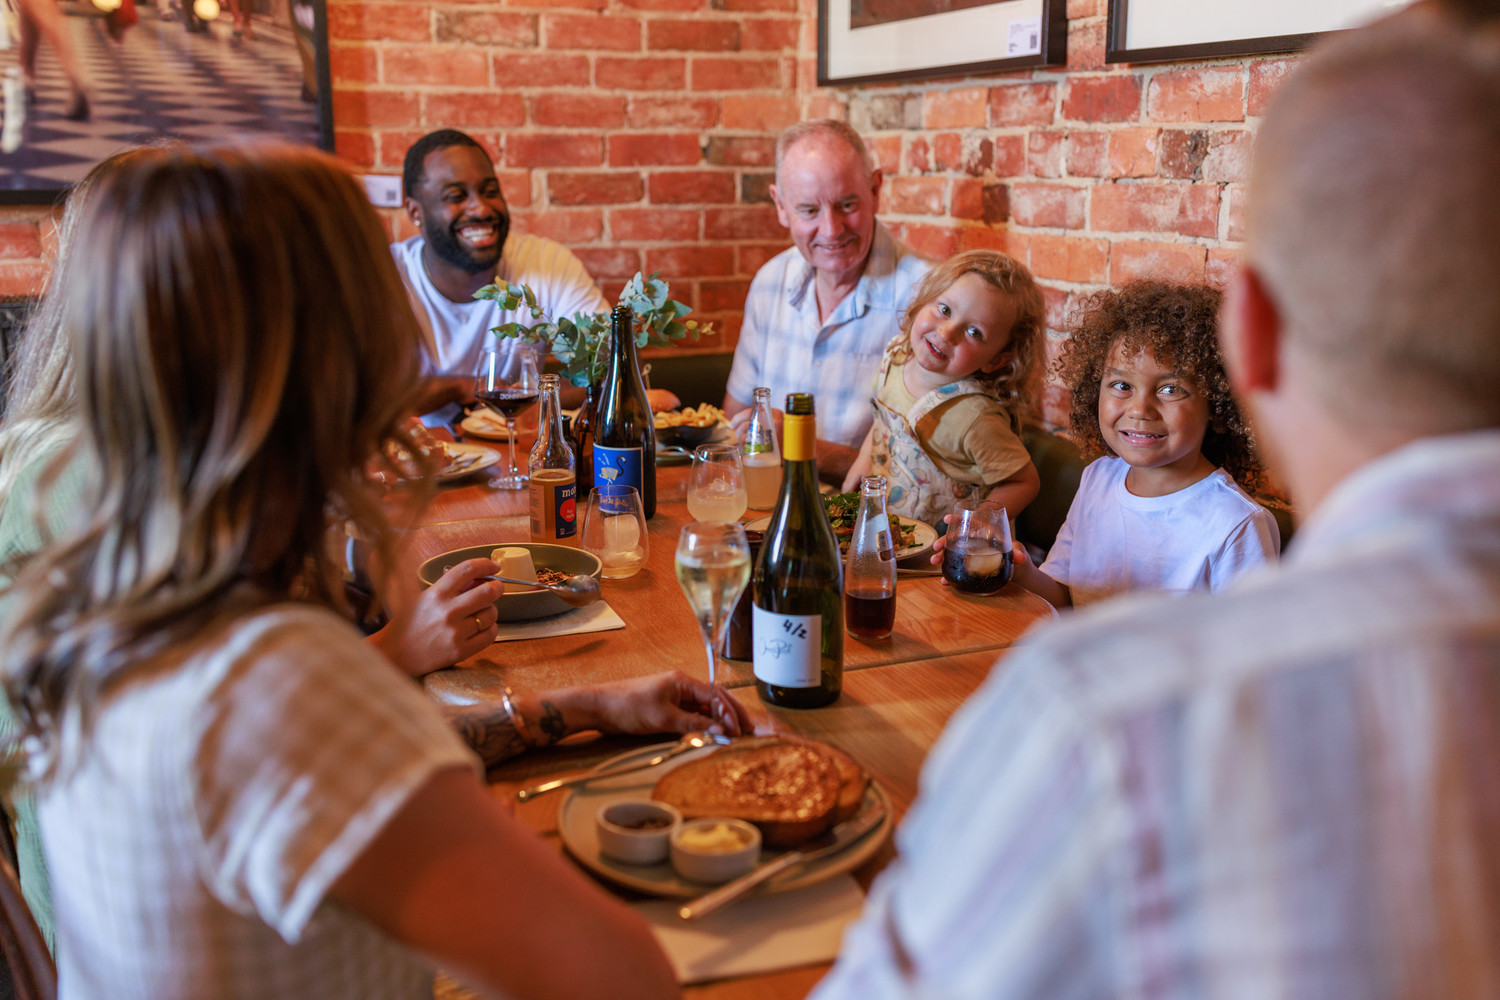 Generic photo group of people around a table sharing food and conversation